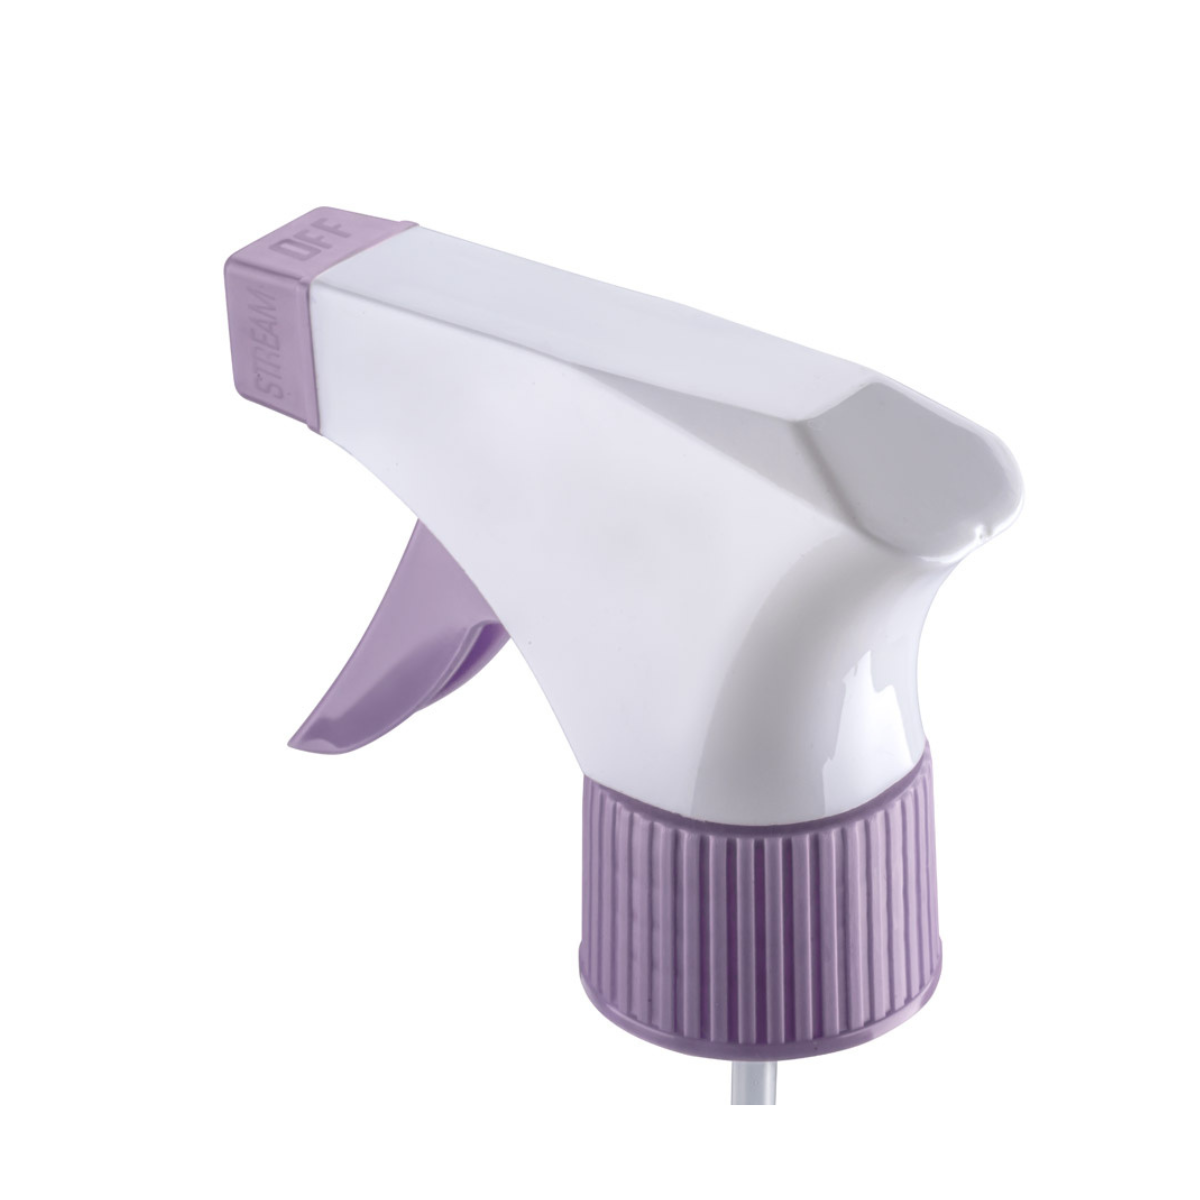 Dompel Trigger Sprayers valves, color lilac, thread 28/410, made with stainless steel springs and glass balls, with spray and stream Model 101D - depilcompany